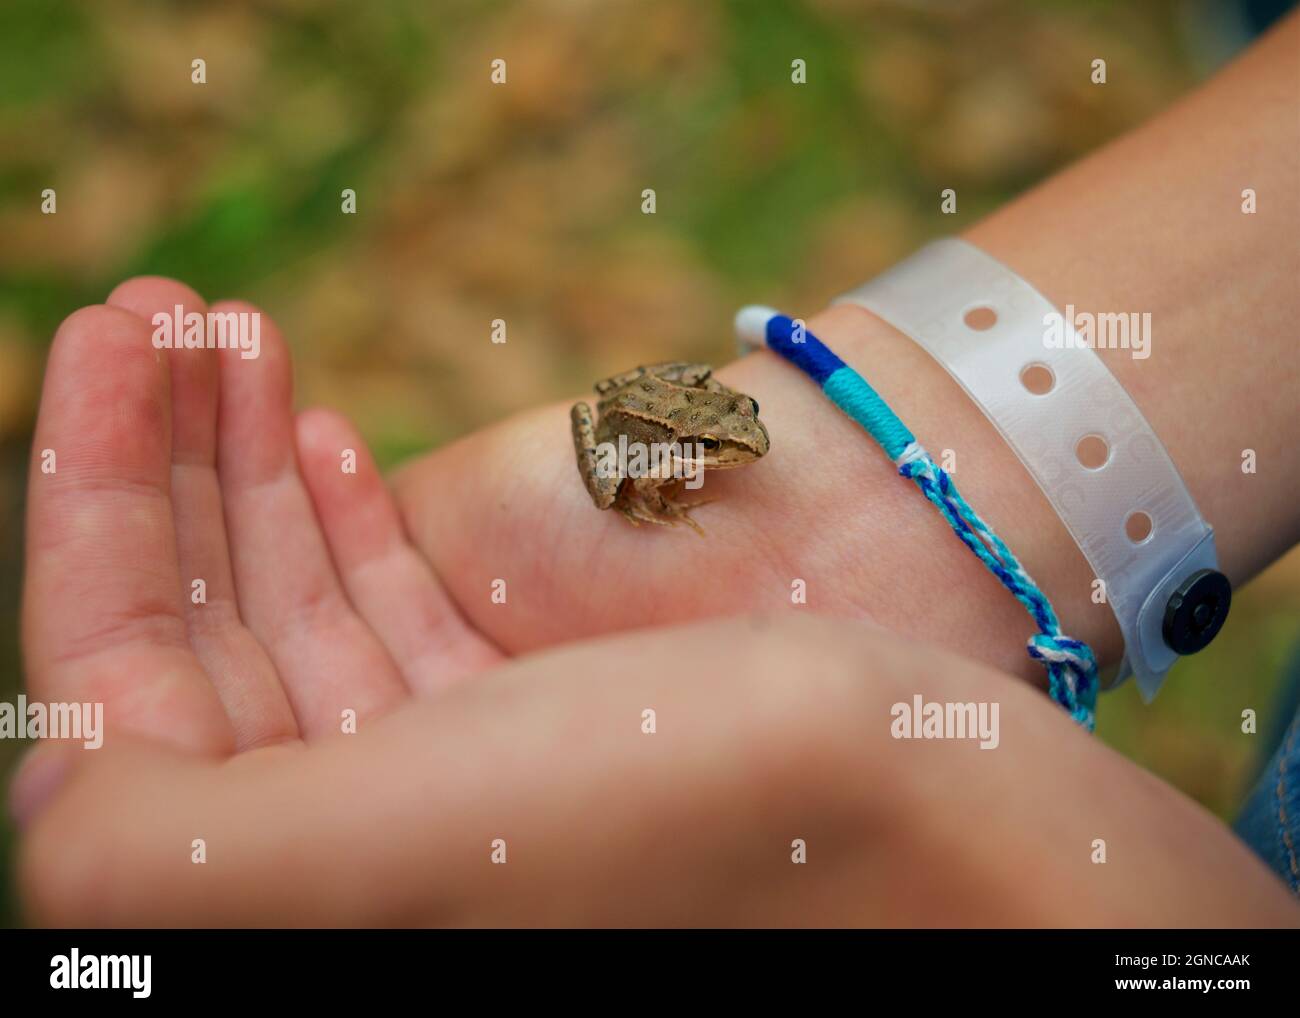 Diminutive frog on a girl's wrist. Norfolk, EnglandTiny colourful frong set against red background of a bench with pointing finger for scale. Western Australia Stock Photo